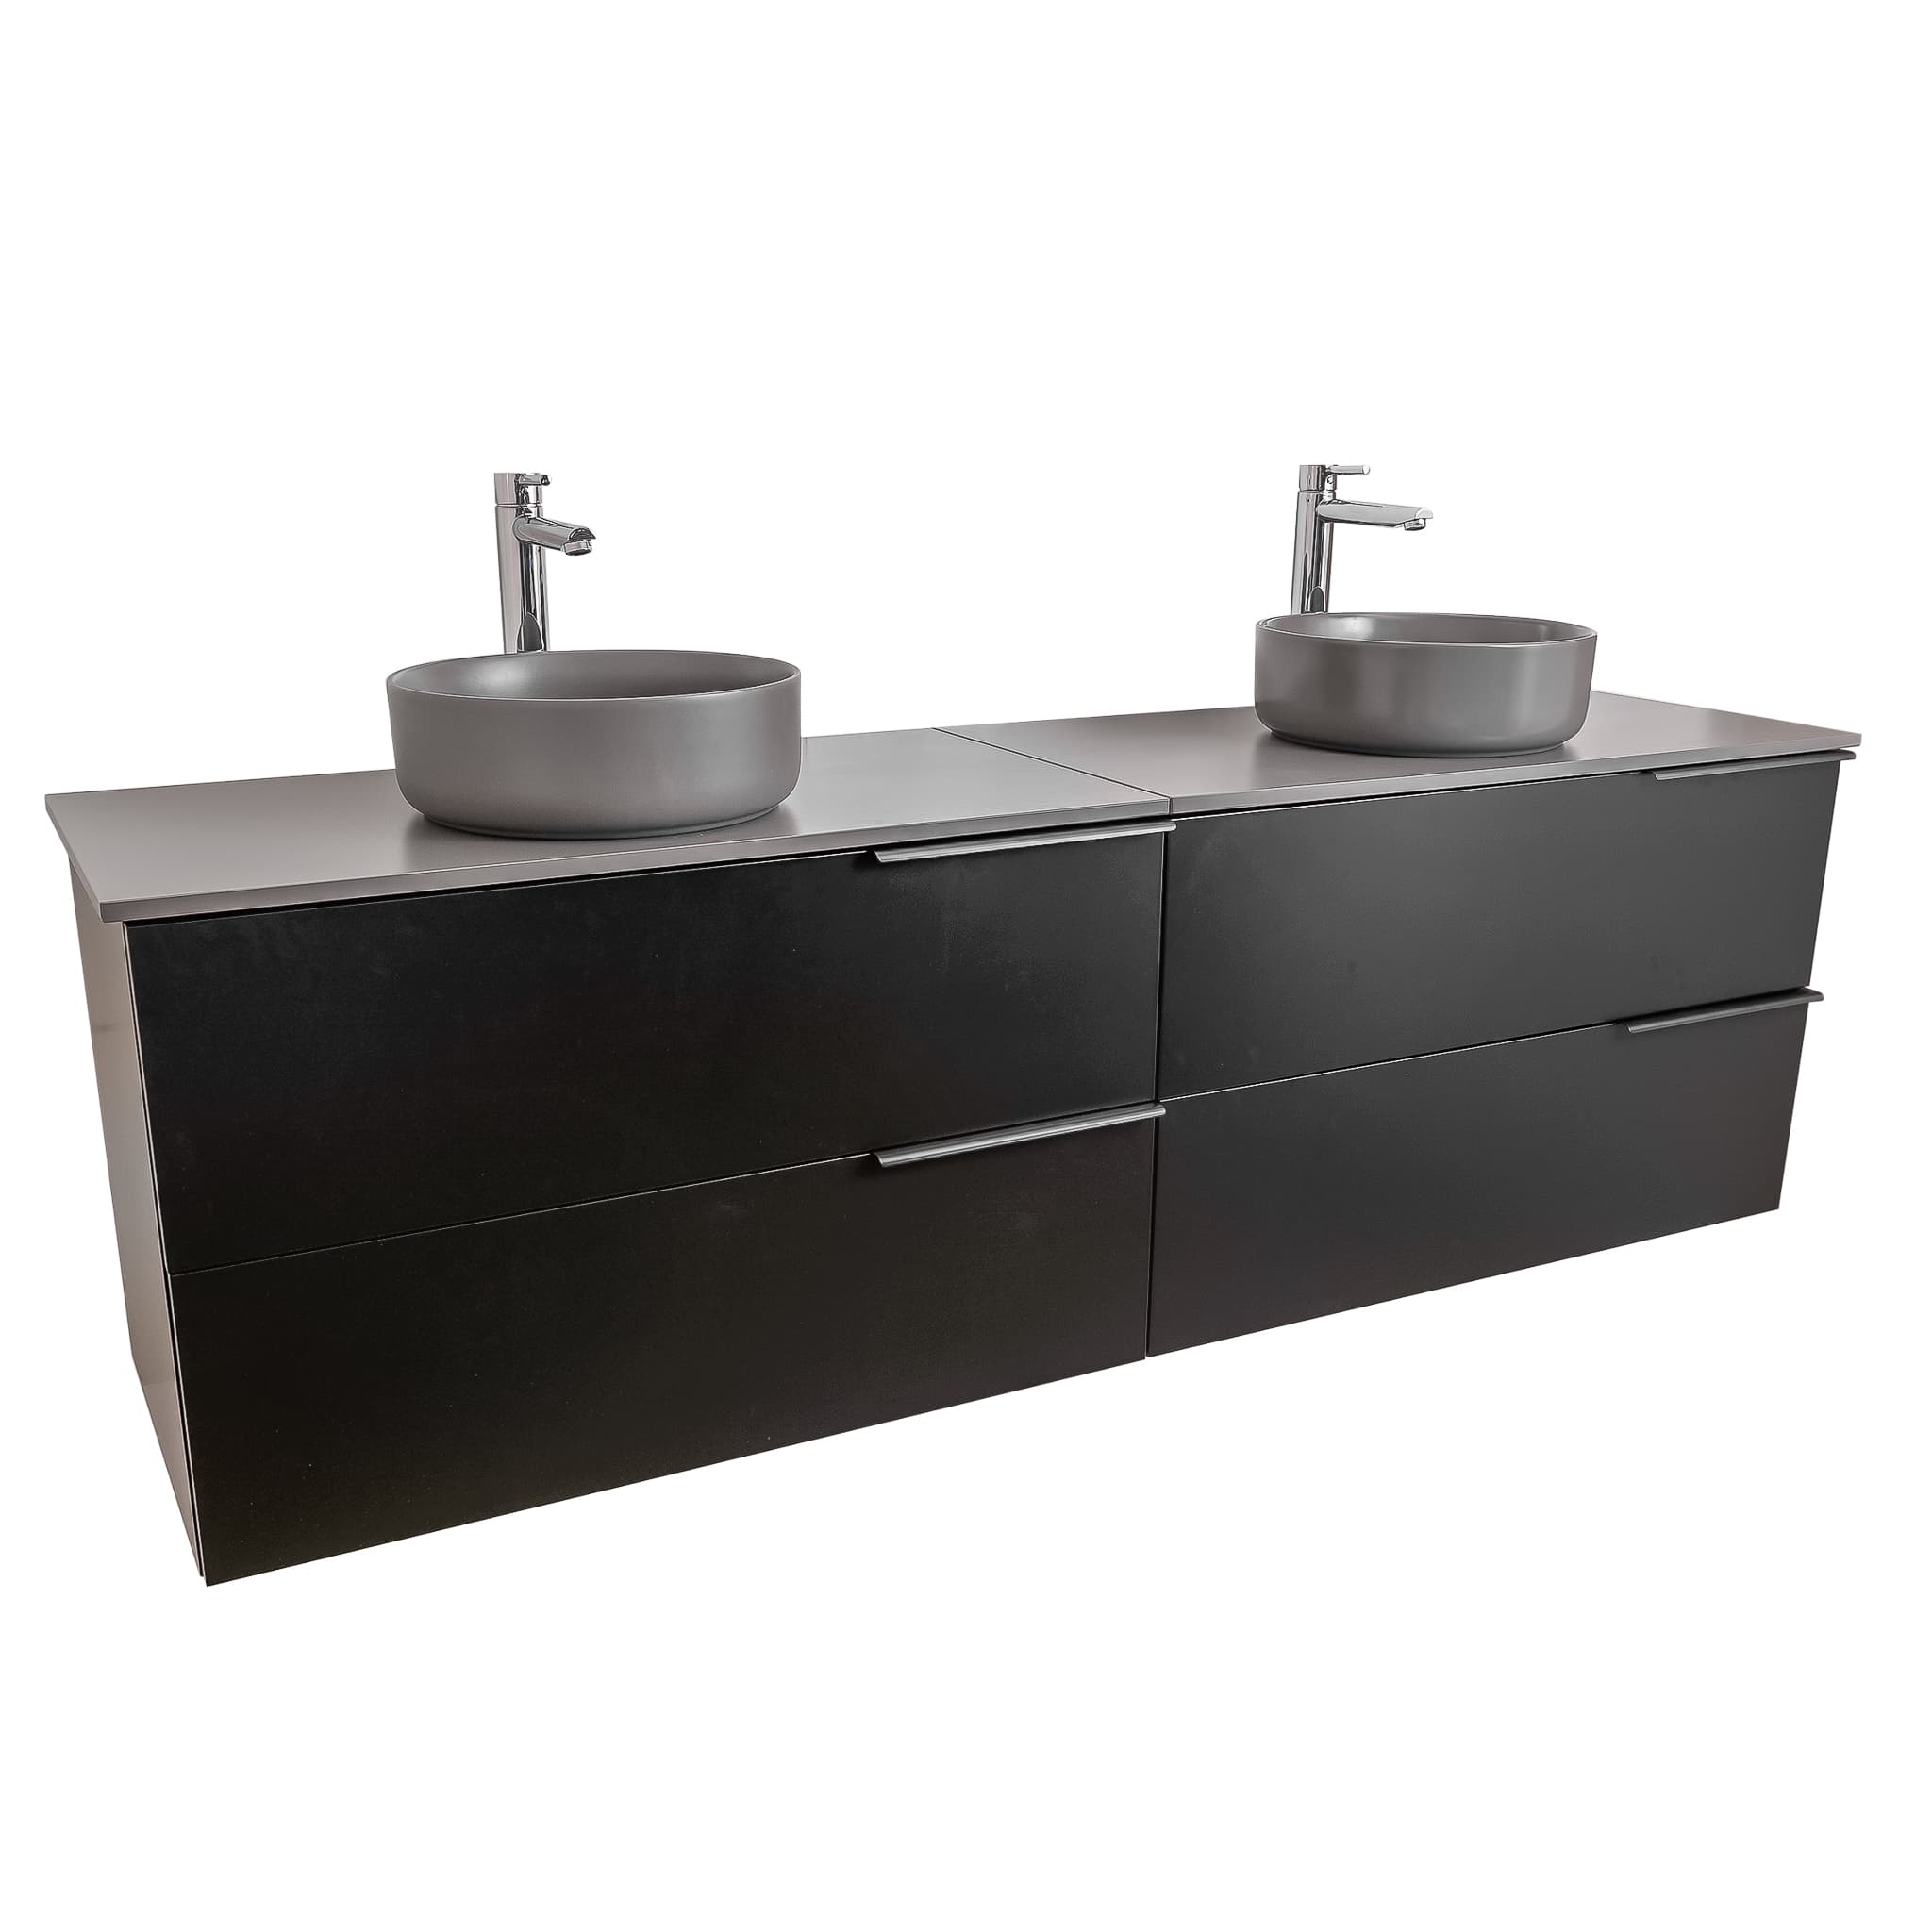 Mallorca 63 Matte Black Cabinet, Ares Grey Ceniza Top And Two Ares Grey Ceniza Ceramic Basin, Wall Mounted Modern Vanity Set